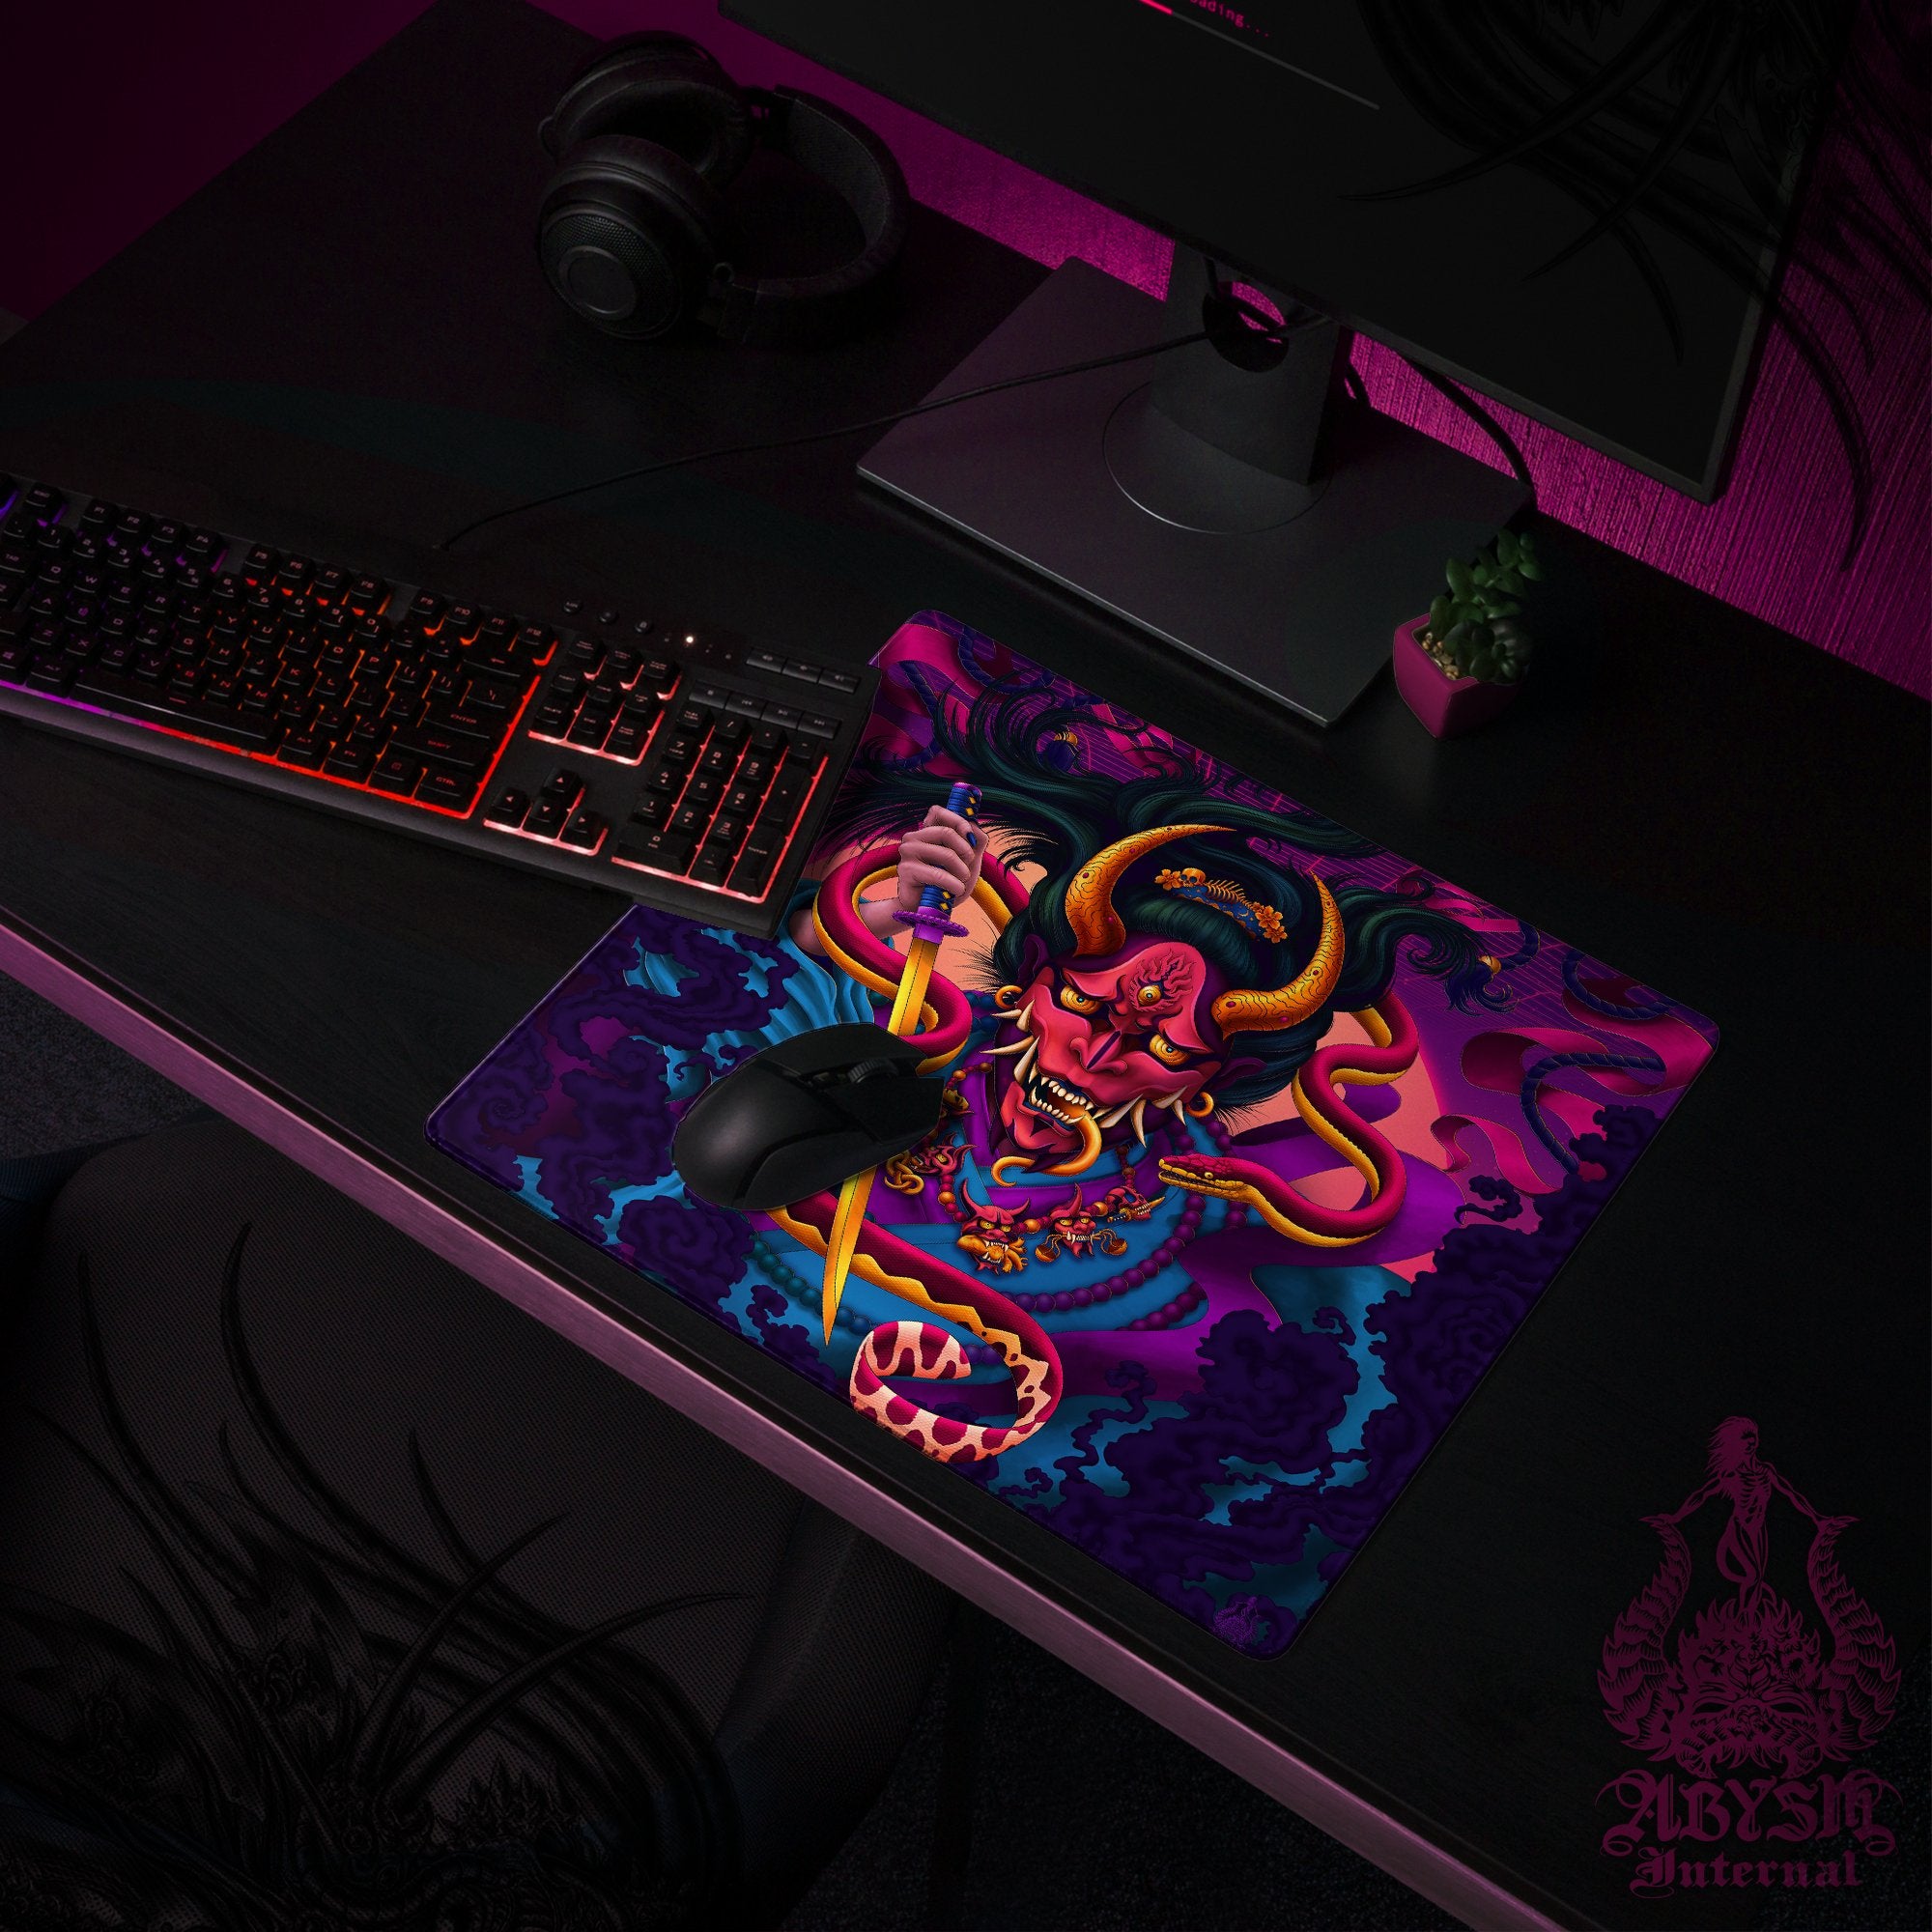 Psychedelic Gaming Mouse Pad, Japanese Demon Desk Mat, Hannya Table Protector Cover, Vaporwave Workpad, Fantasy Anime and Manga Art Print - Snake - Abysm Internal